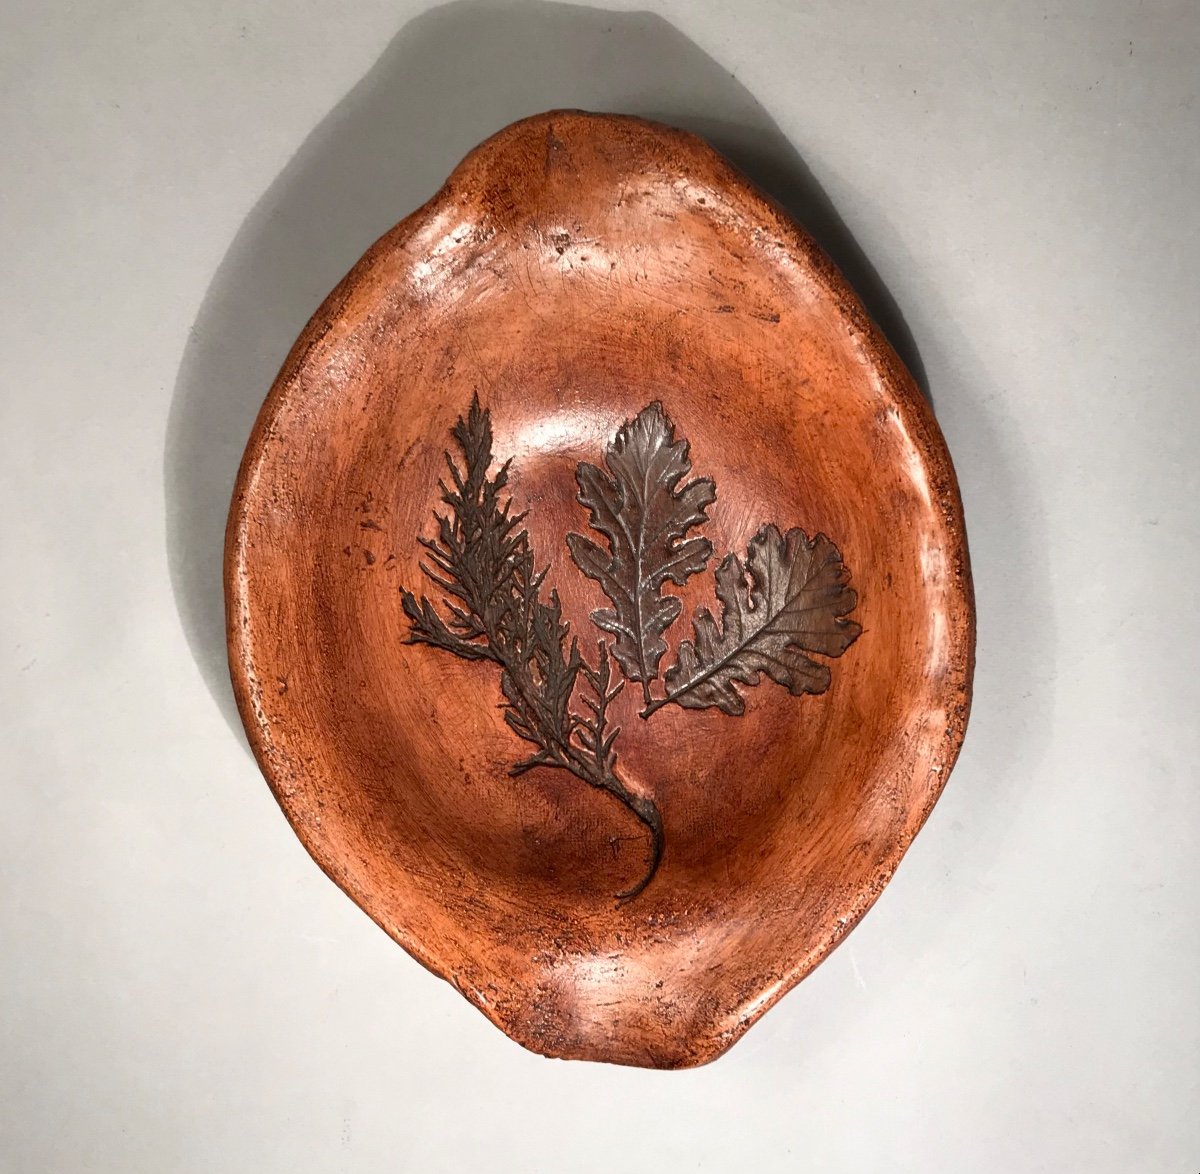 Popular Art Patinated Terracotta Dish With Plant Imprints Early 20th Century Haute-provence